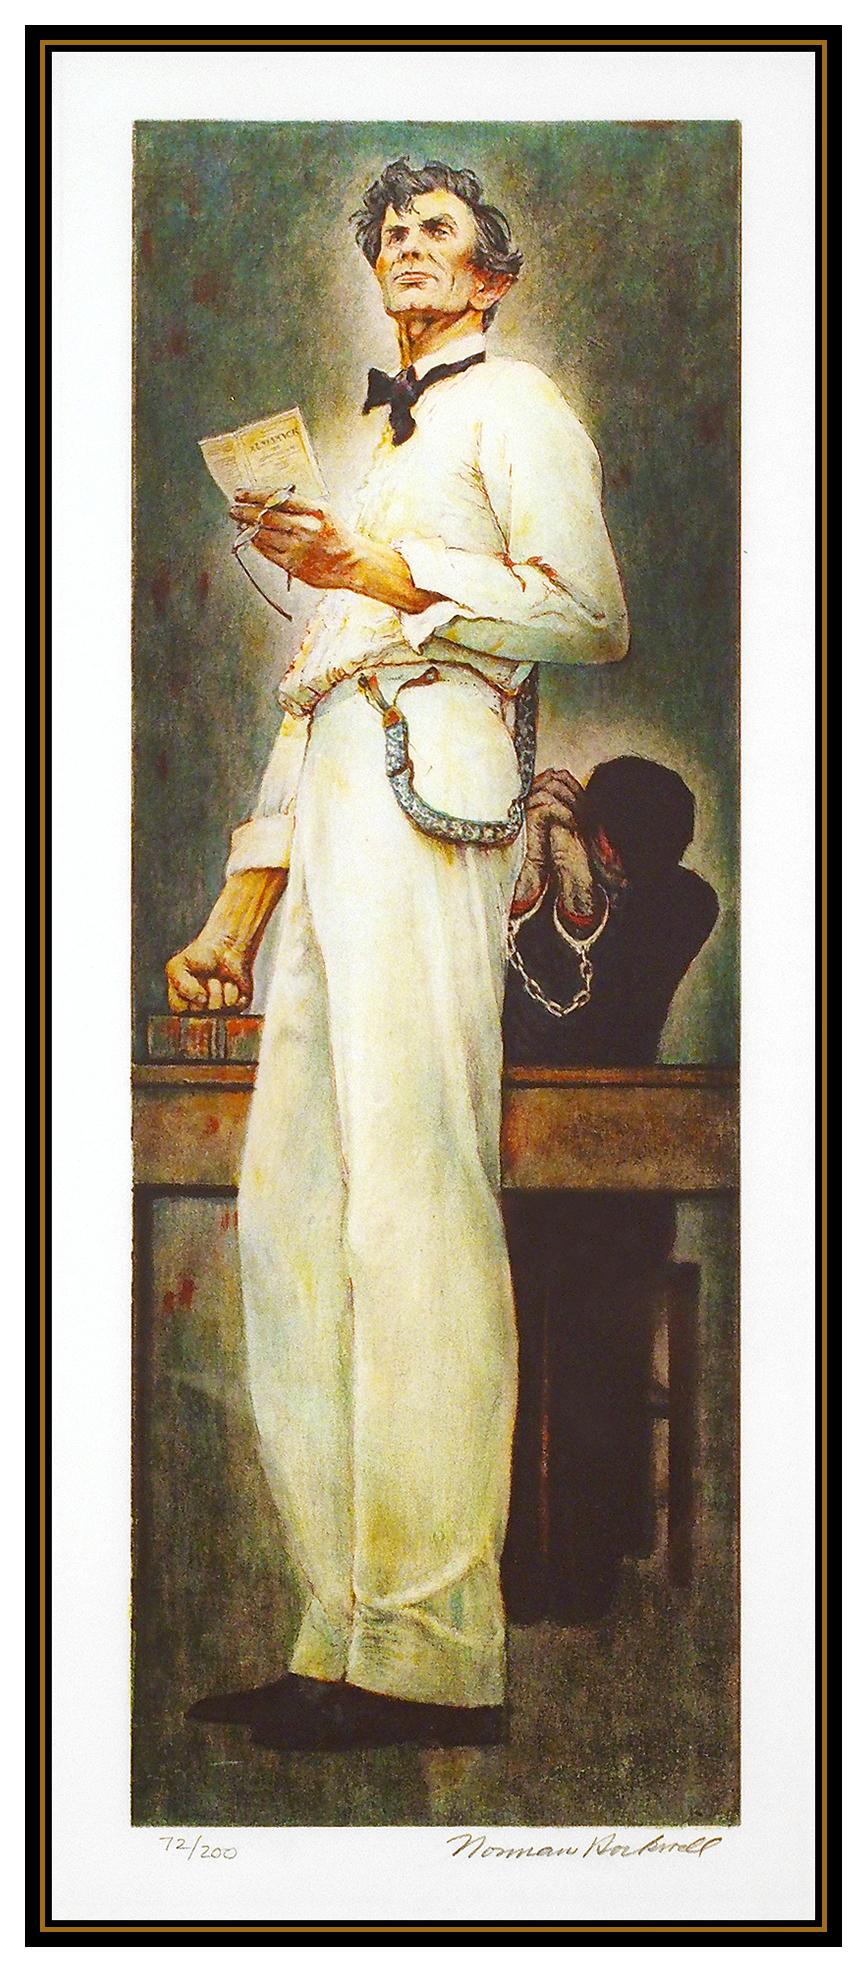 Norman Rockwell Abraham Lincoln Color Lithograph Hand Signed Illustration Framed - Print by After Norman Rockwell